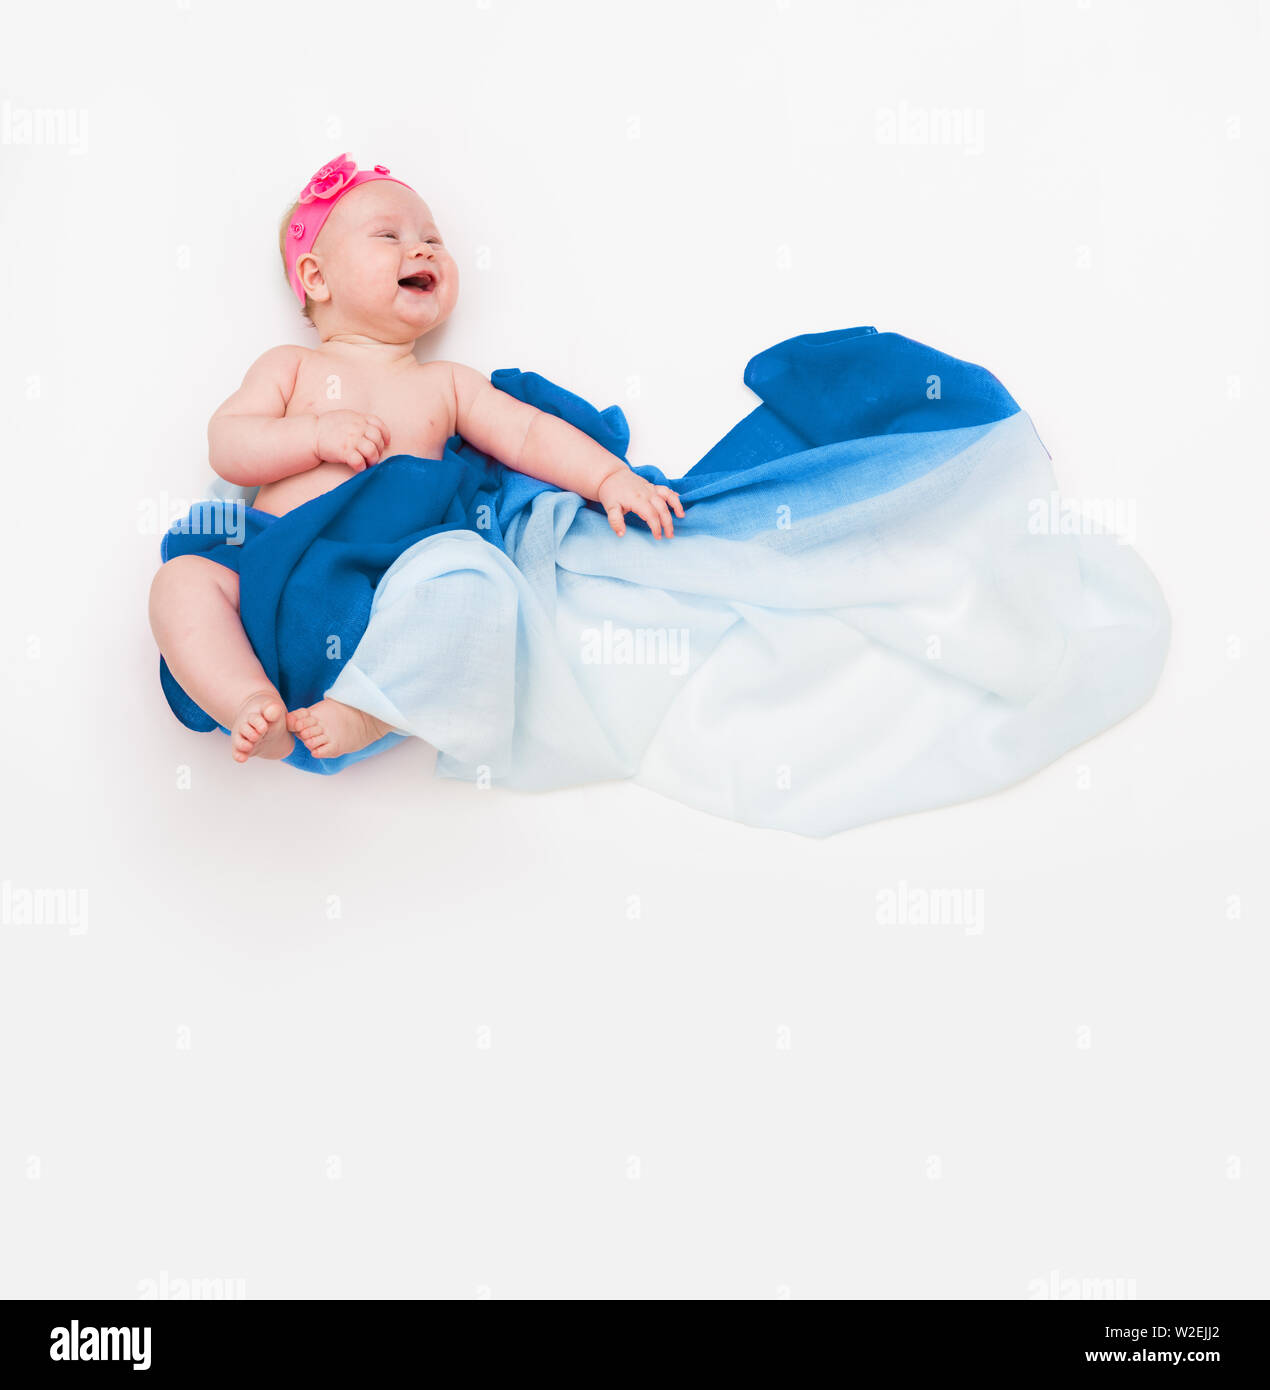 top view of cute infant laughing baby wrapped in a blue scarf depicting a cloud. Stock Photo